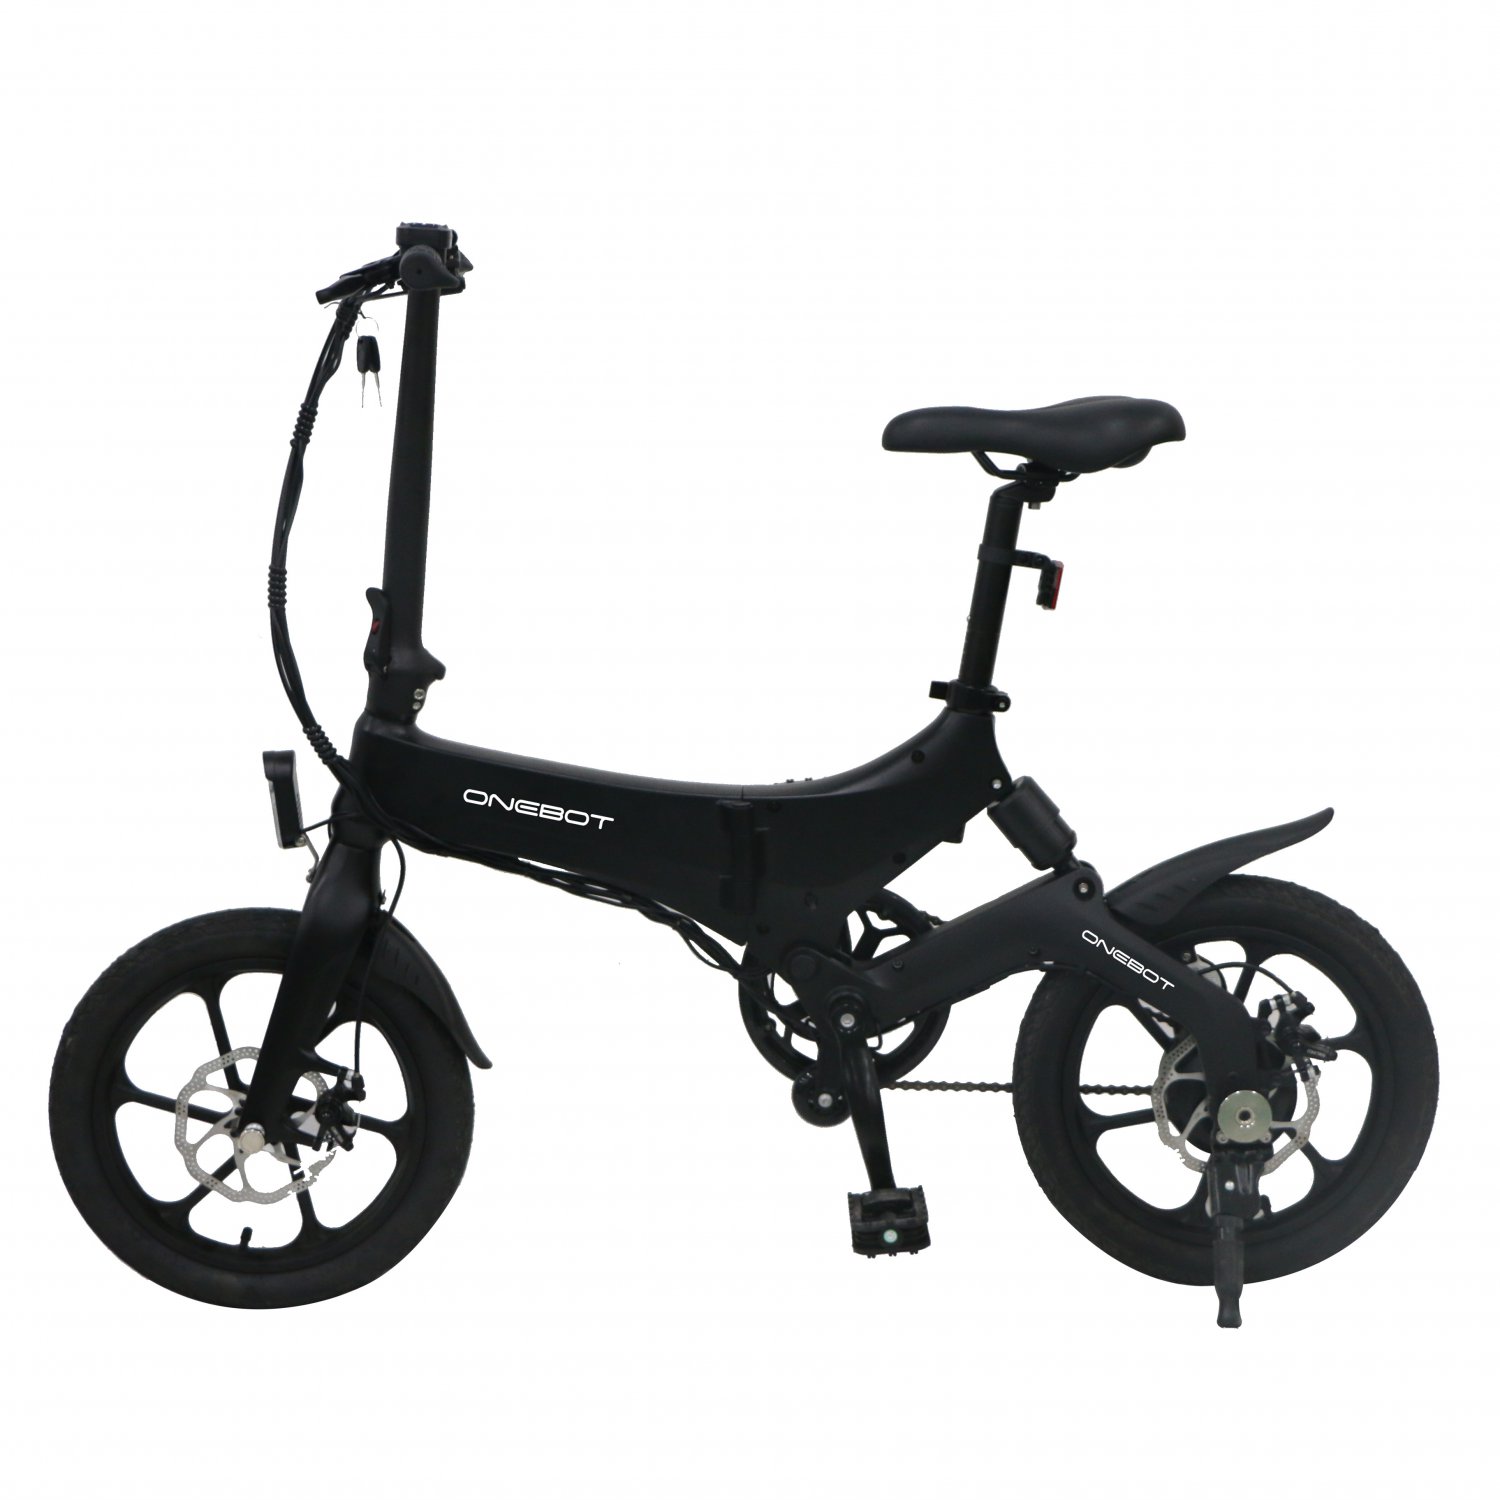 ONEBOT S6 Foldable City E-bike with Var. Speed, 250W Motor + 6.4Ah Battery (black)